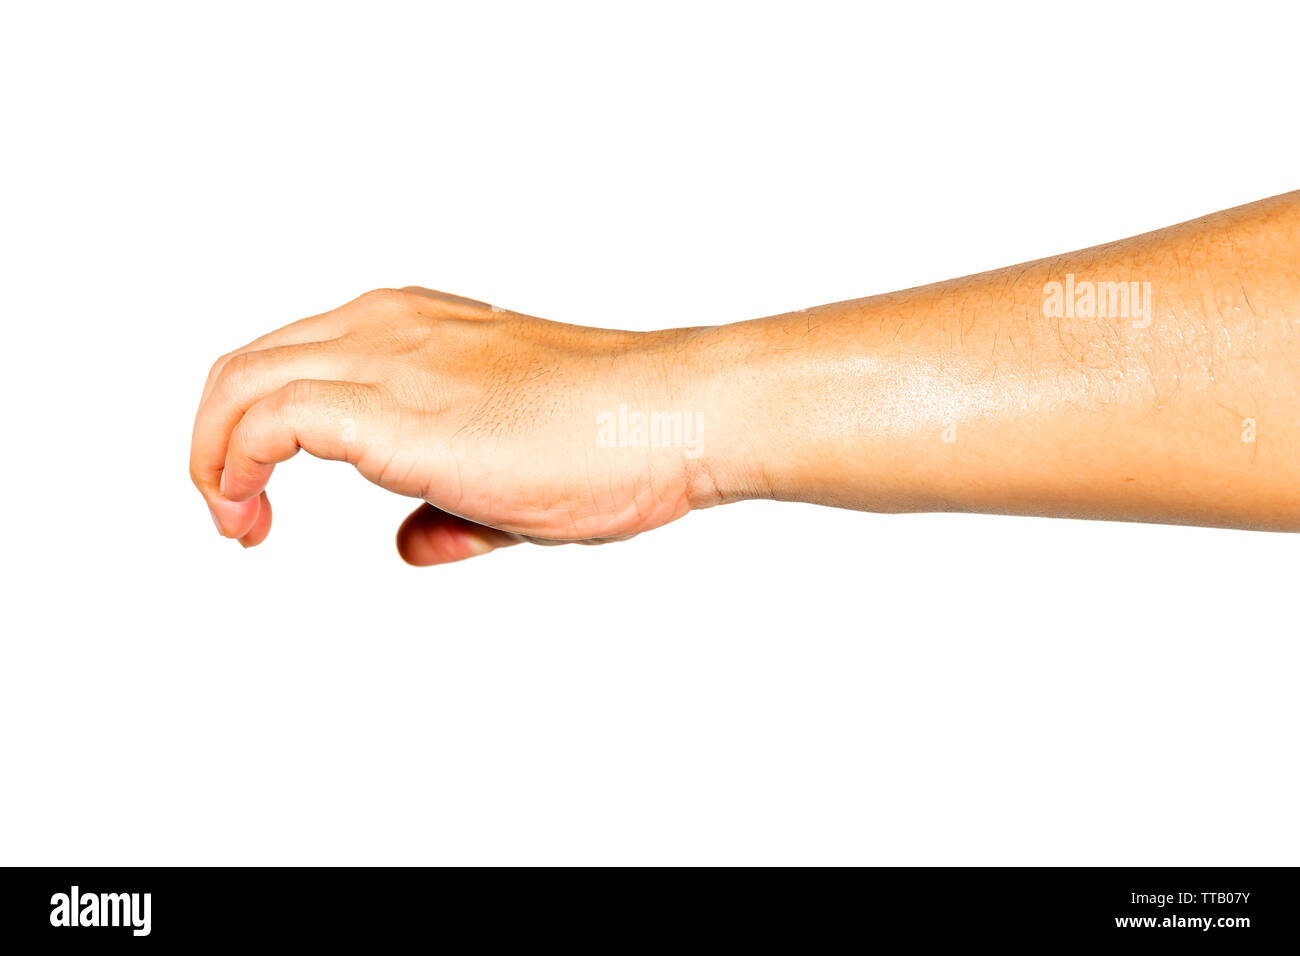 The hand that is doing gestures is picking up things. Stock Photo